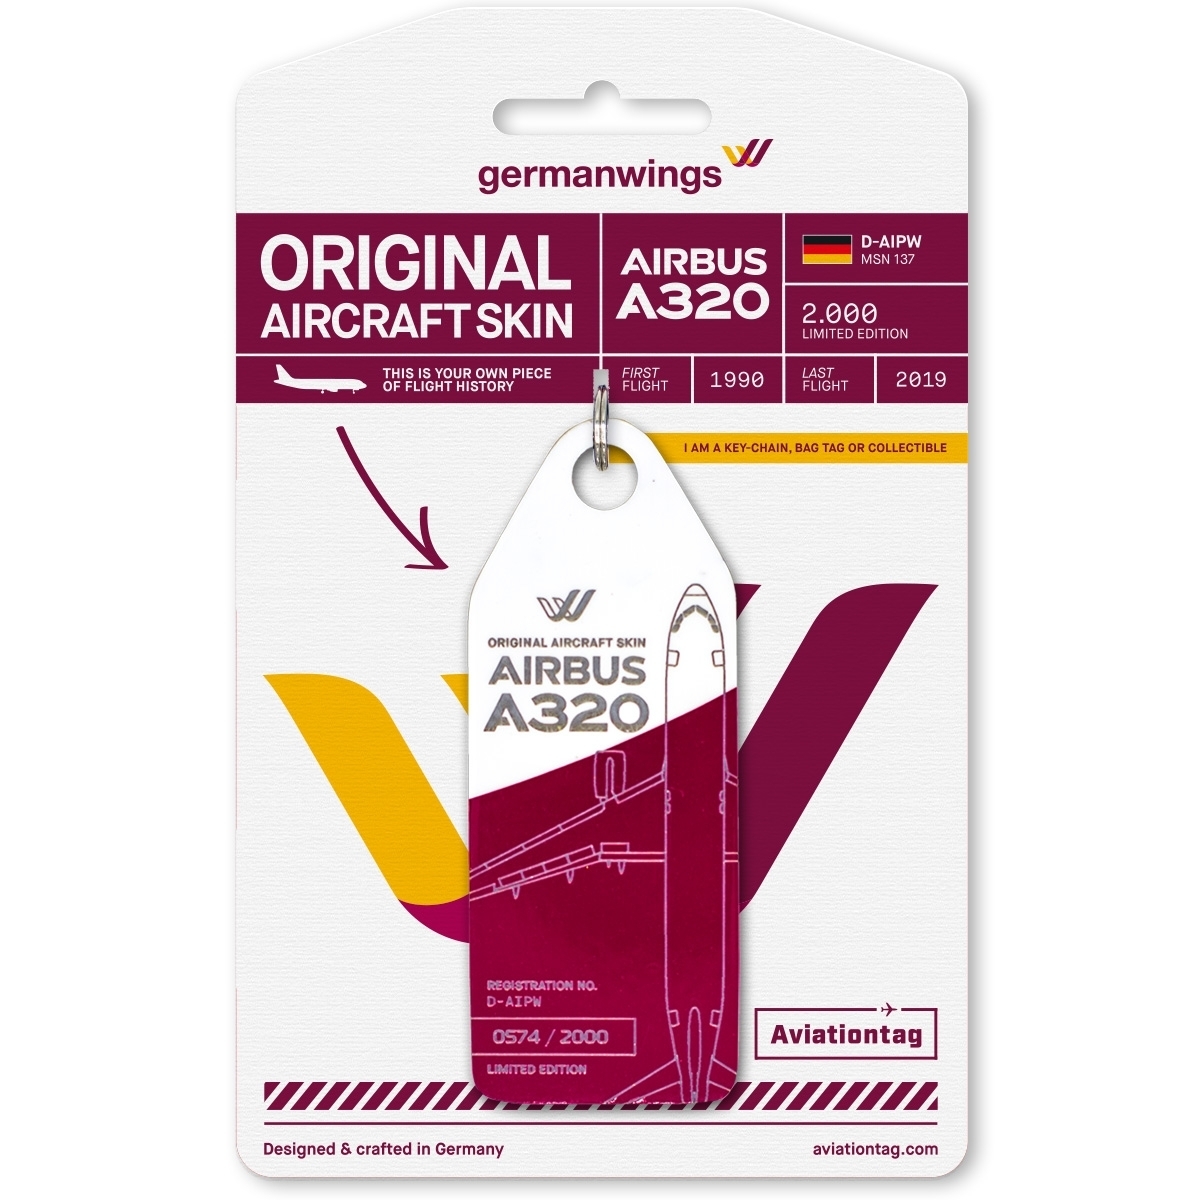 Aviationtag Germanwings - Airbus A320 - D-AIPW White, Purple